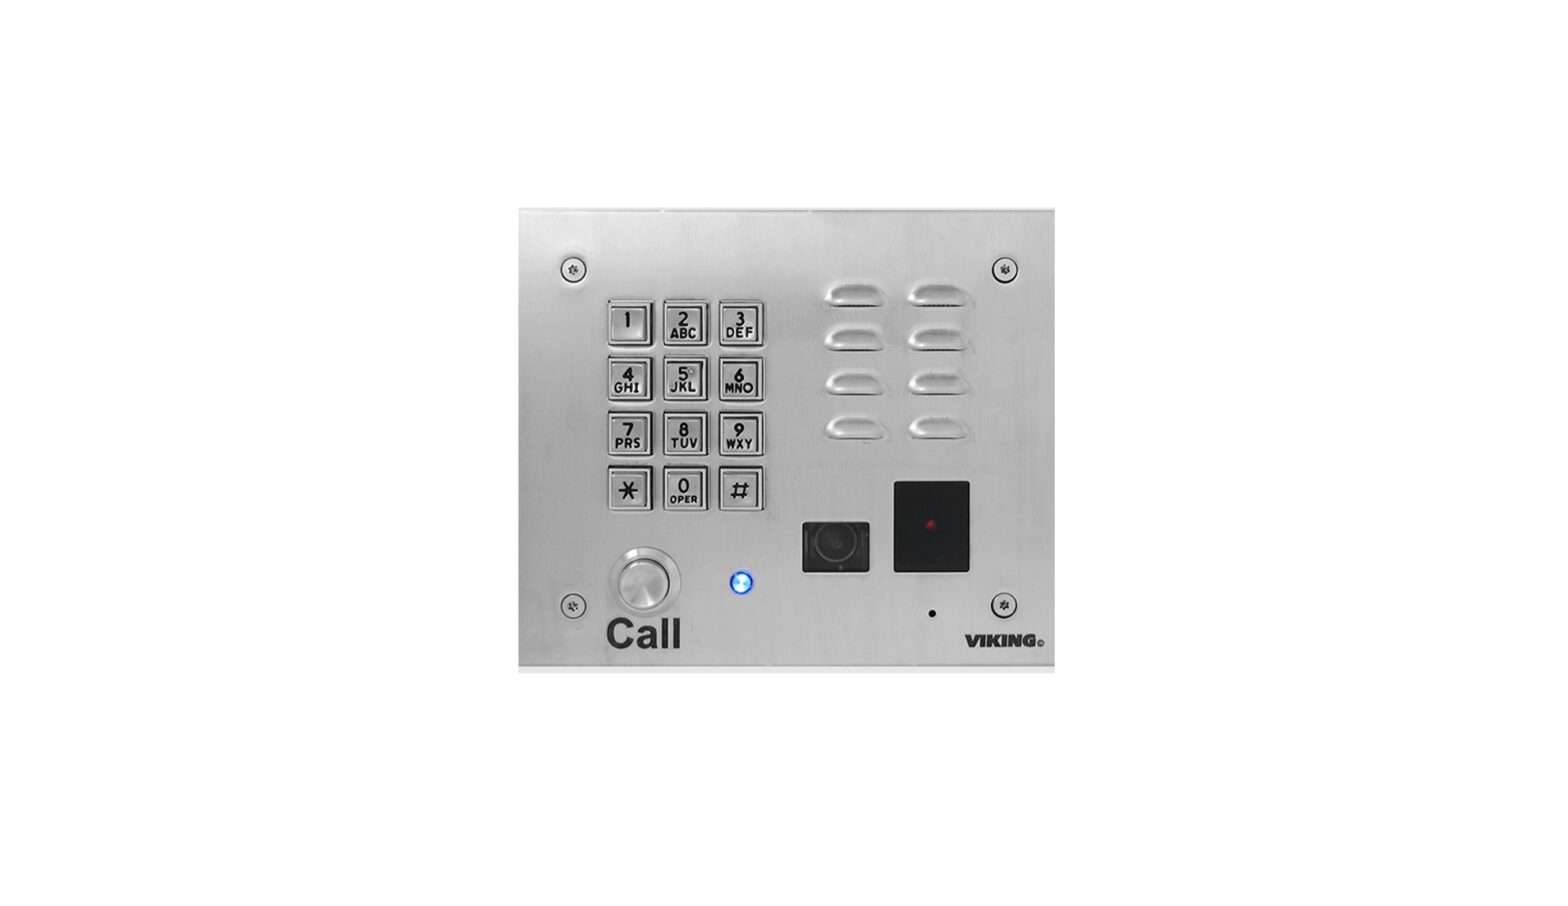 VIKING K-1775-IP Series Phone System with Proximity Card Reader and Video Camera User Manual - Featured image